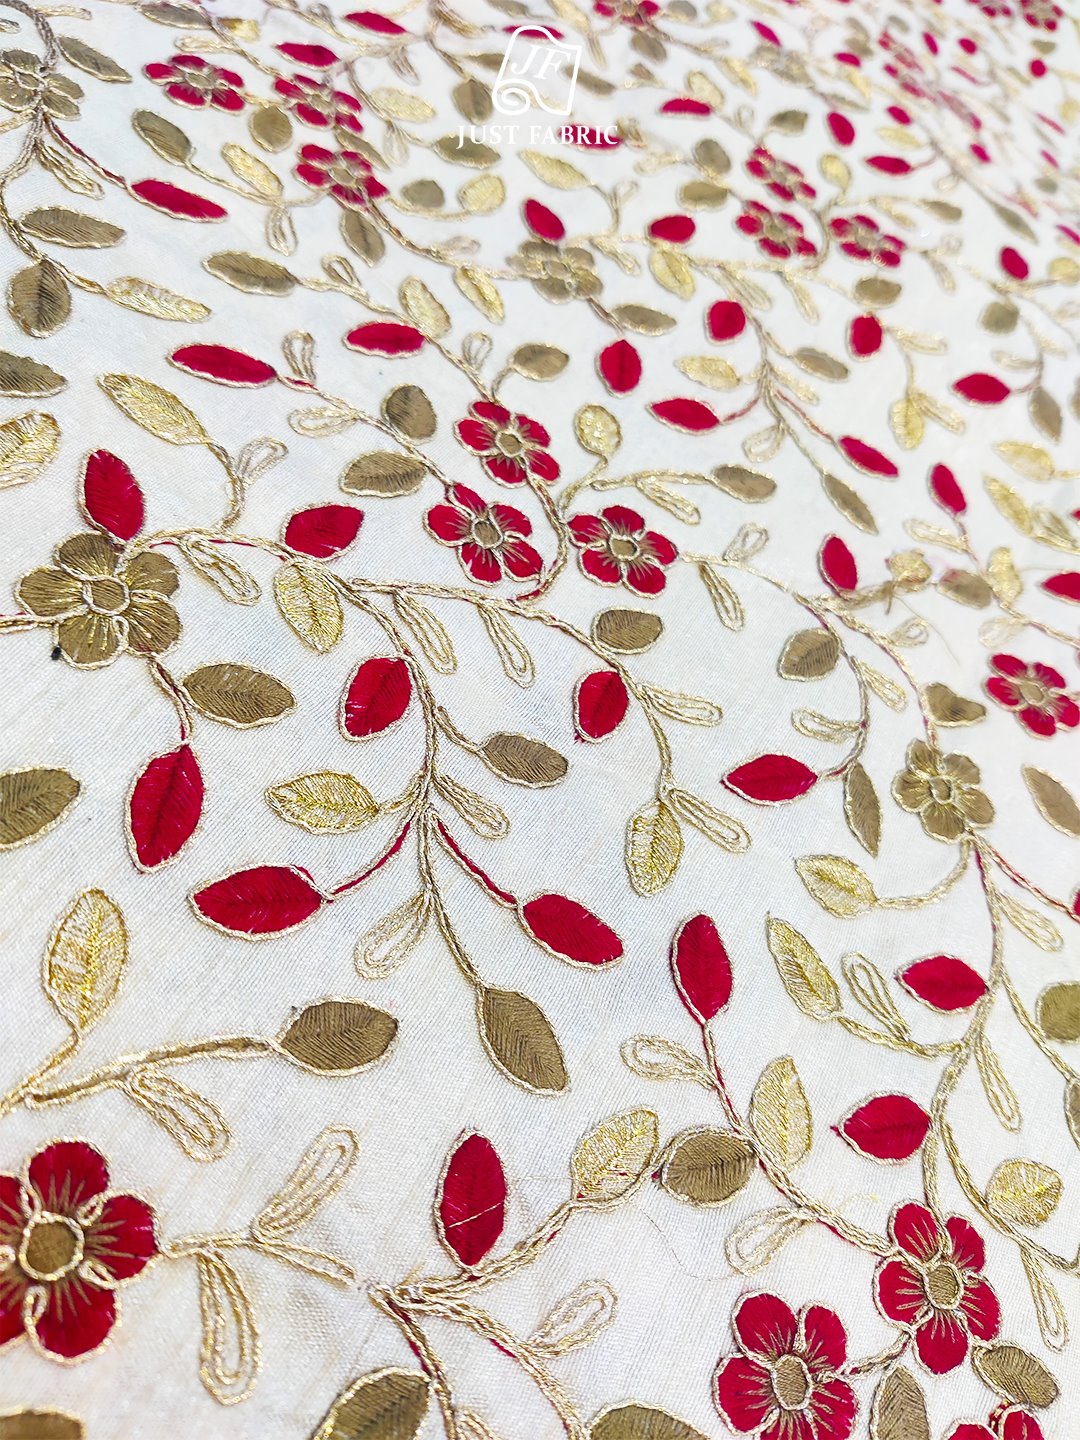 Thread work of Leaf Jaal Allover on Tusser Silk Fabric With Embroidery ( 56" Inch Width) JUST FABRIC